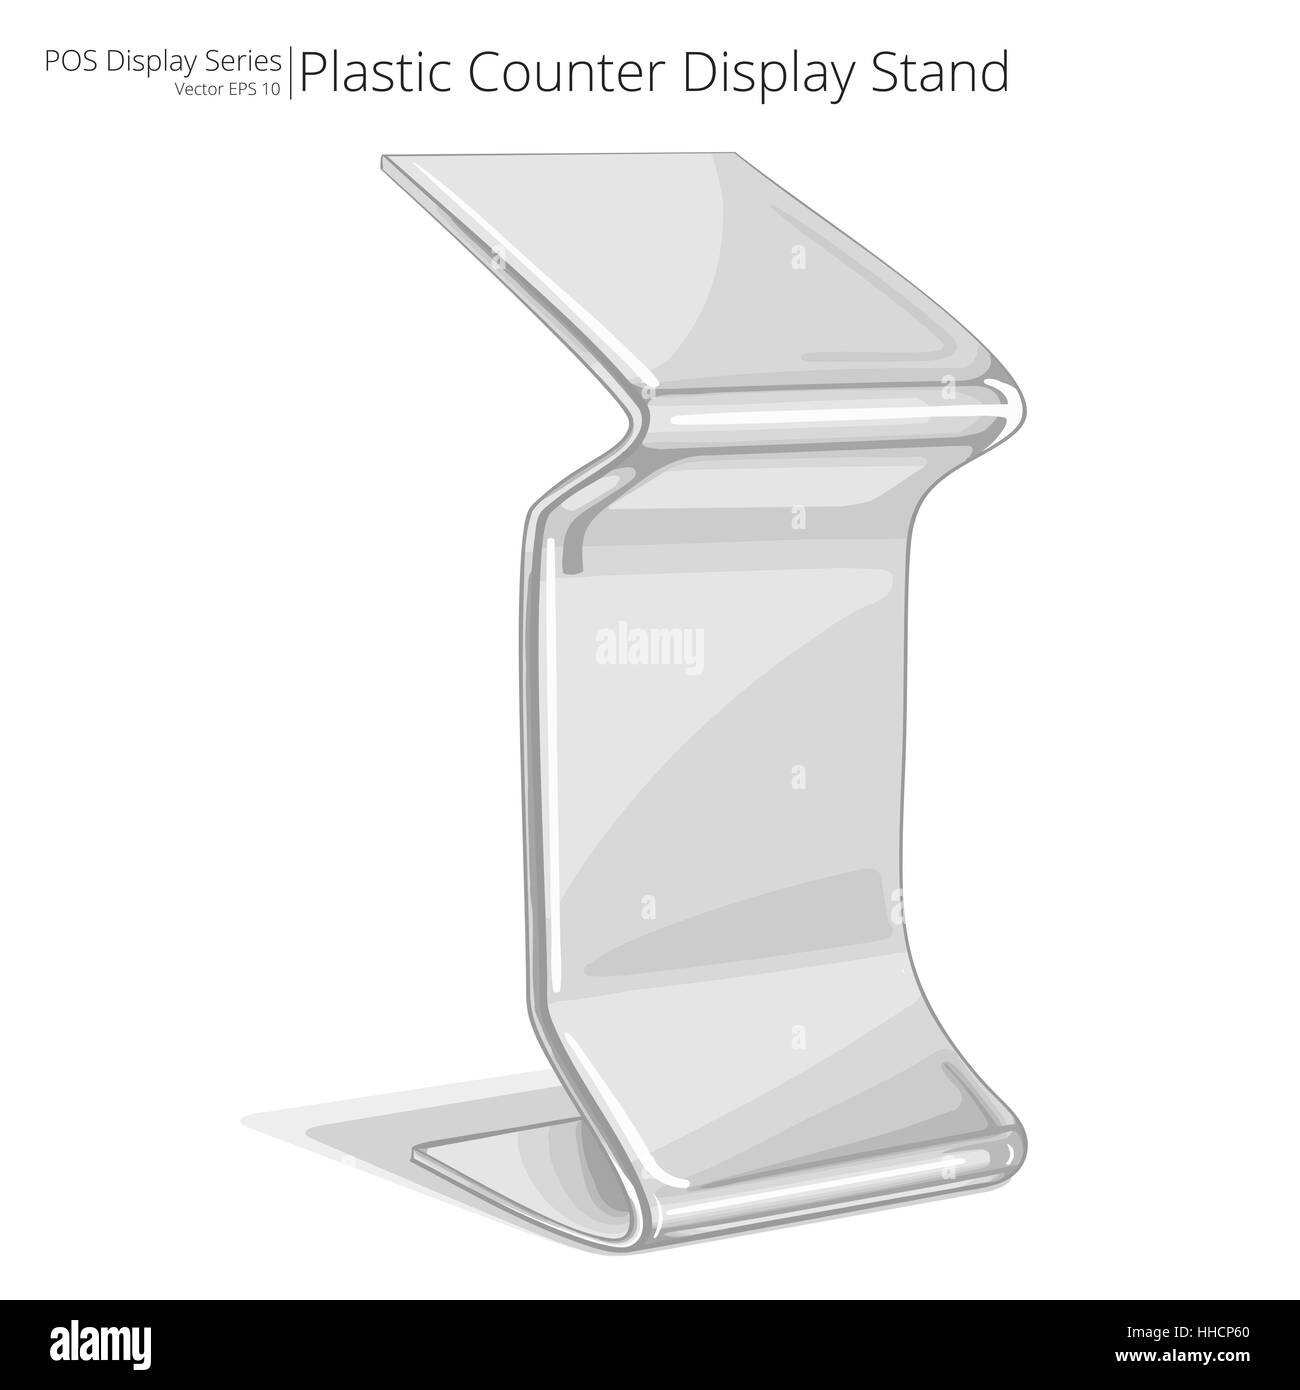 Vector, Illustration of a Counter Display Stand. Sketch style. POS series. Stock Photo